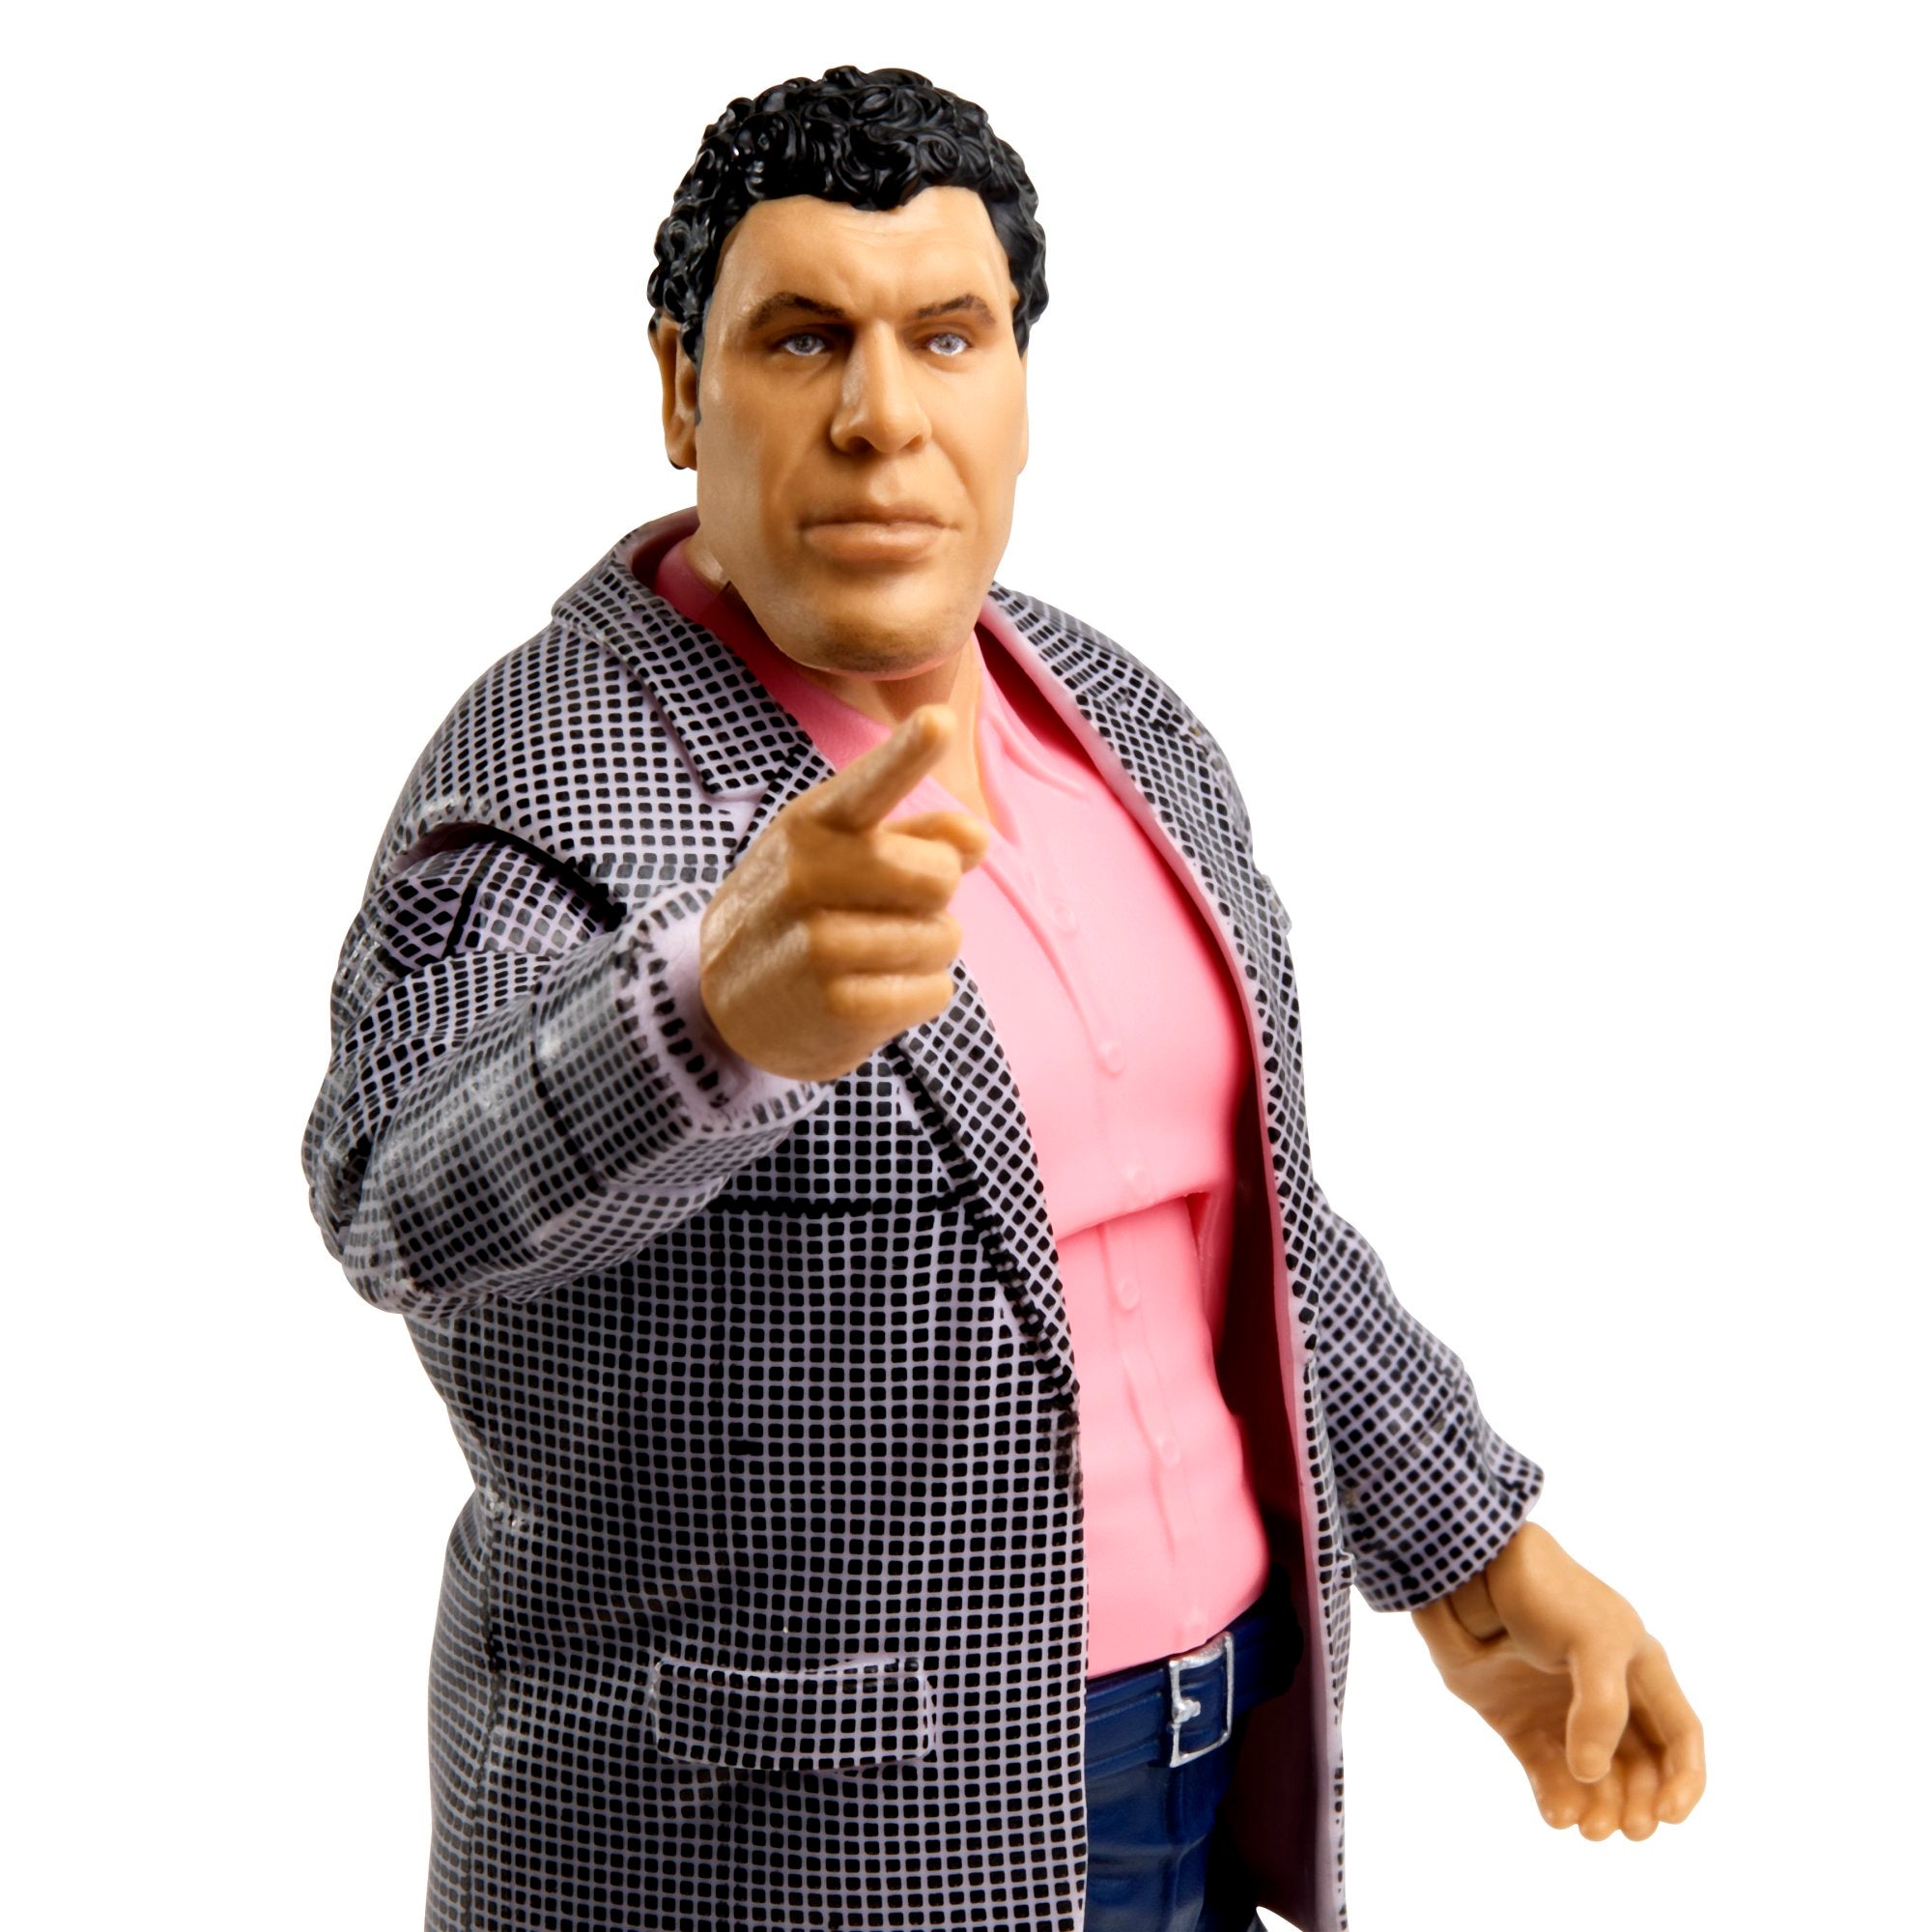 WWE Elite Collection Andre the Giant Action Figure